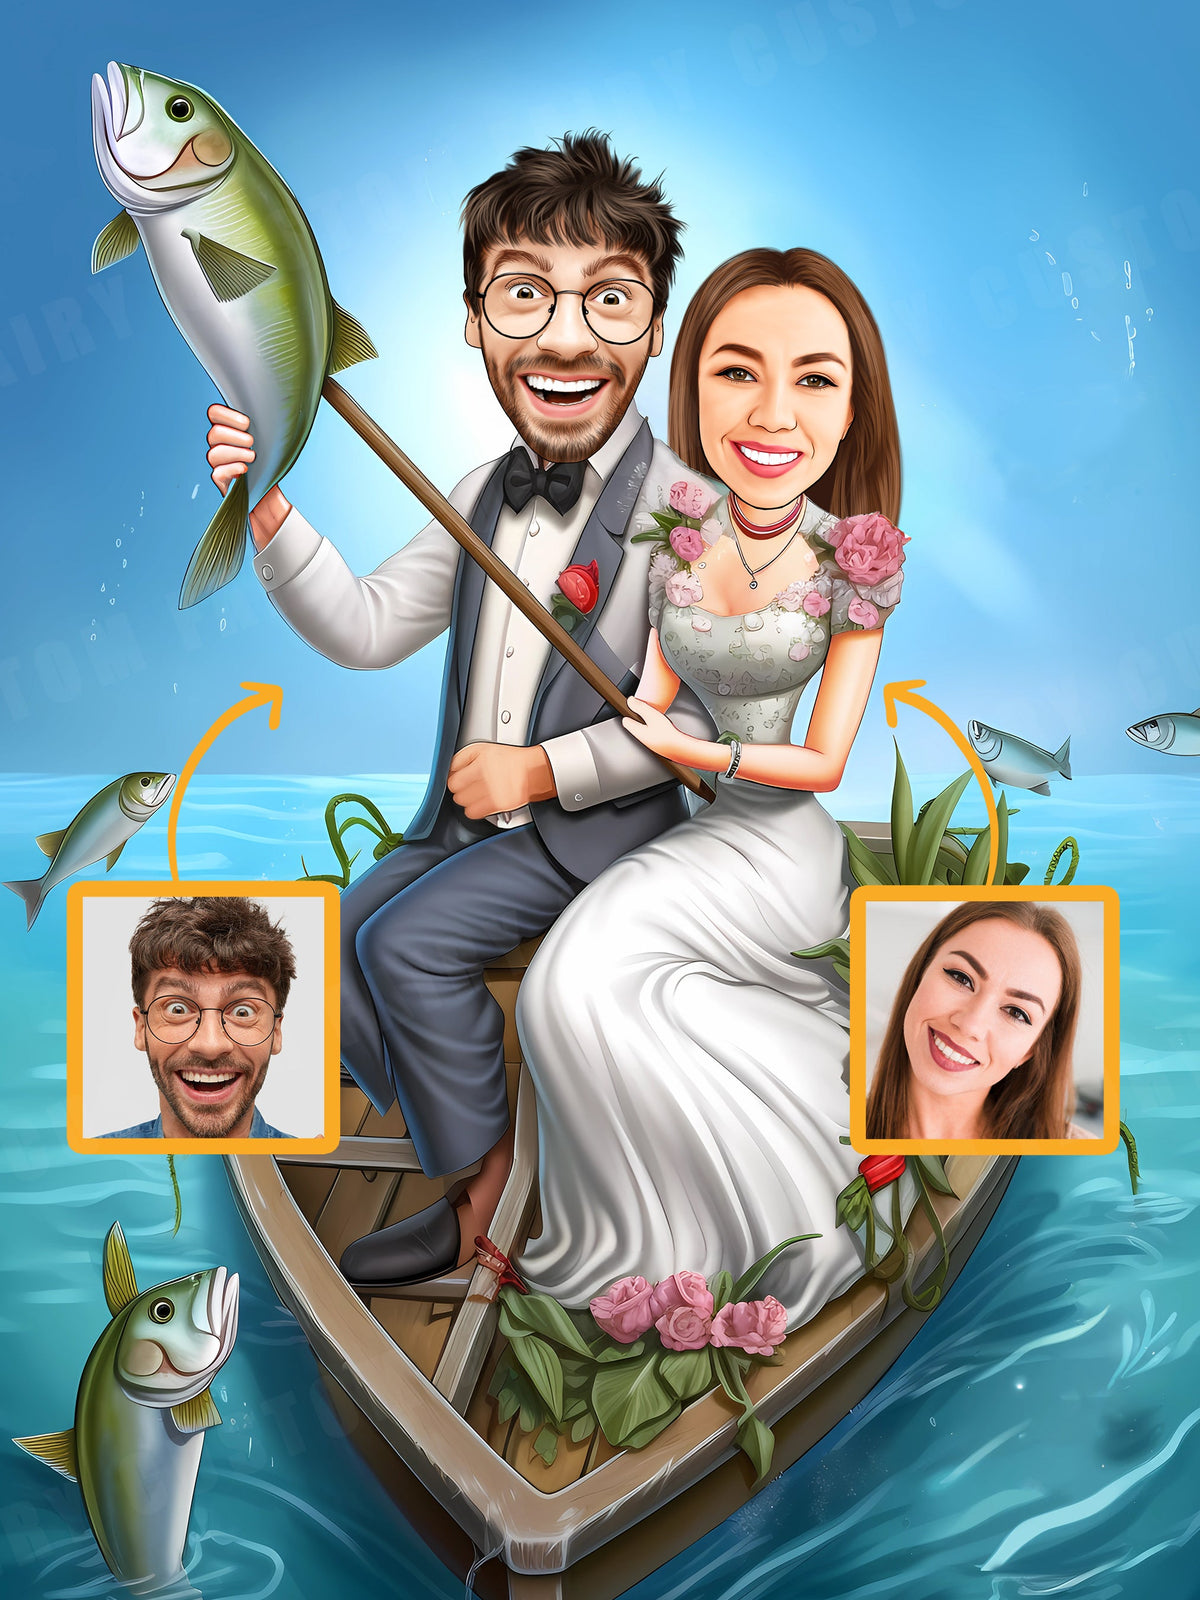 Personalized Caricature Gift of Fishing Married Couple